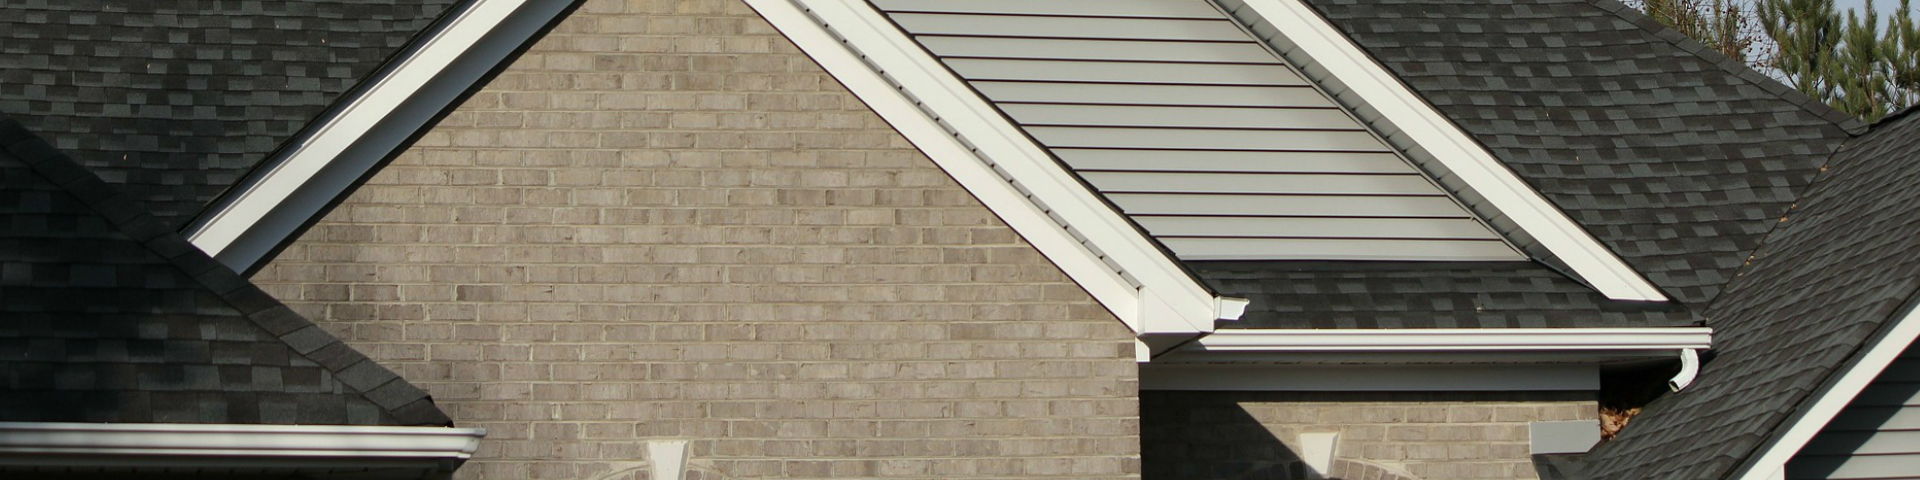 home Gutter Installation Westchester ny